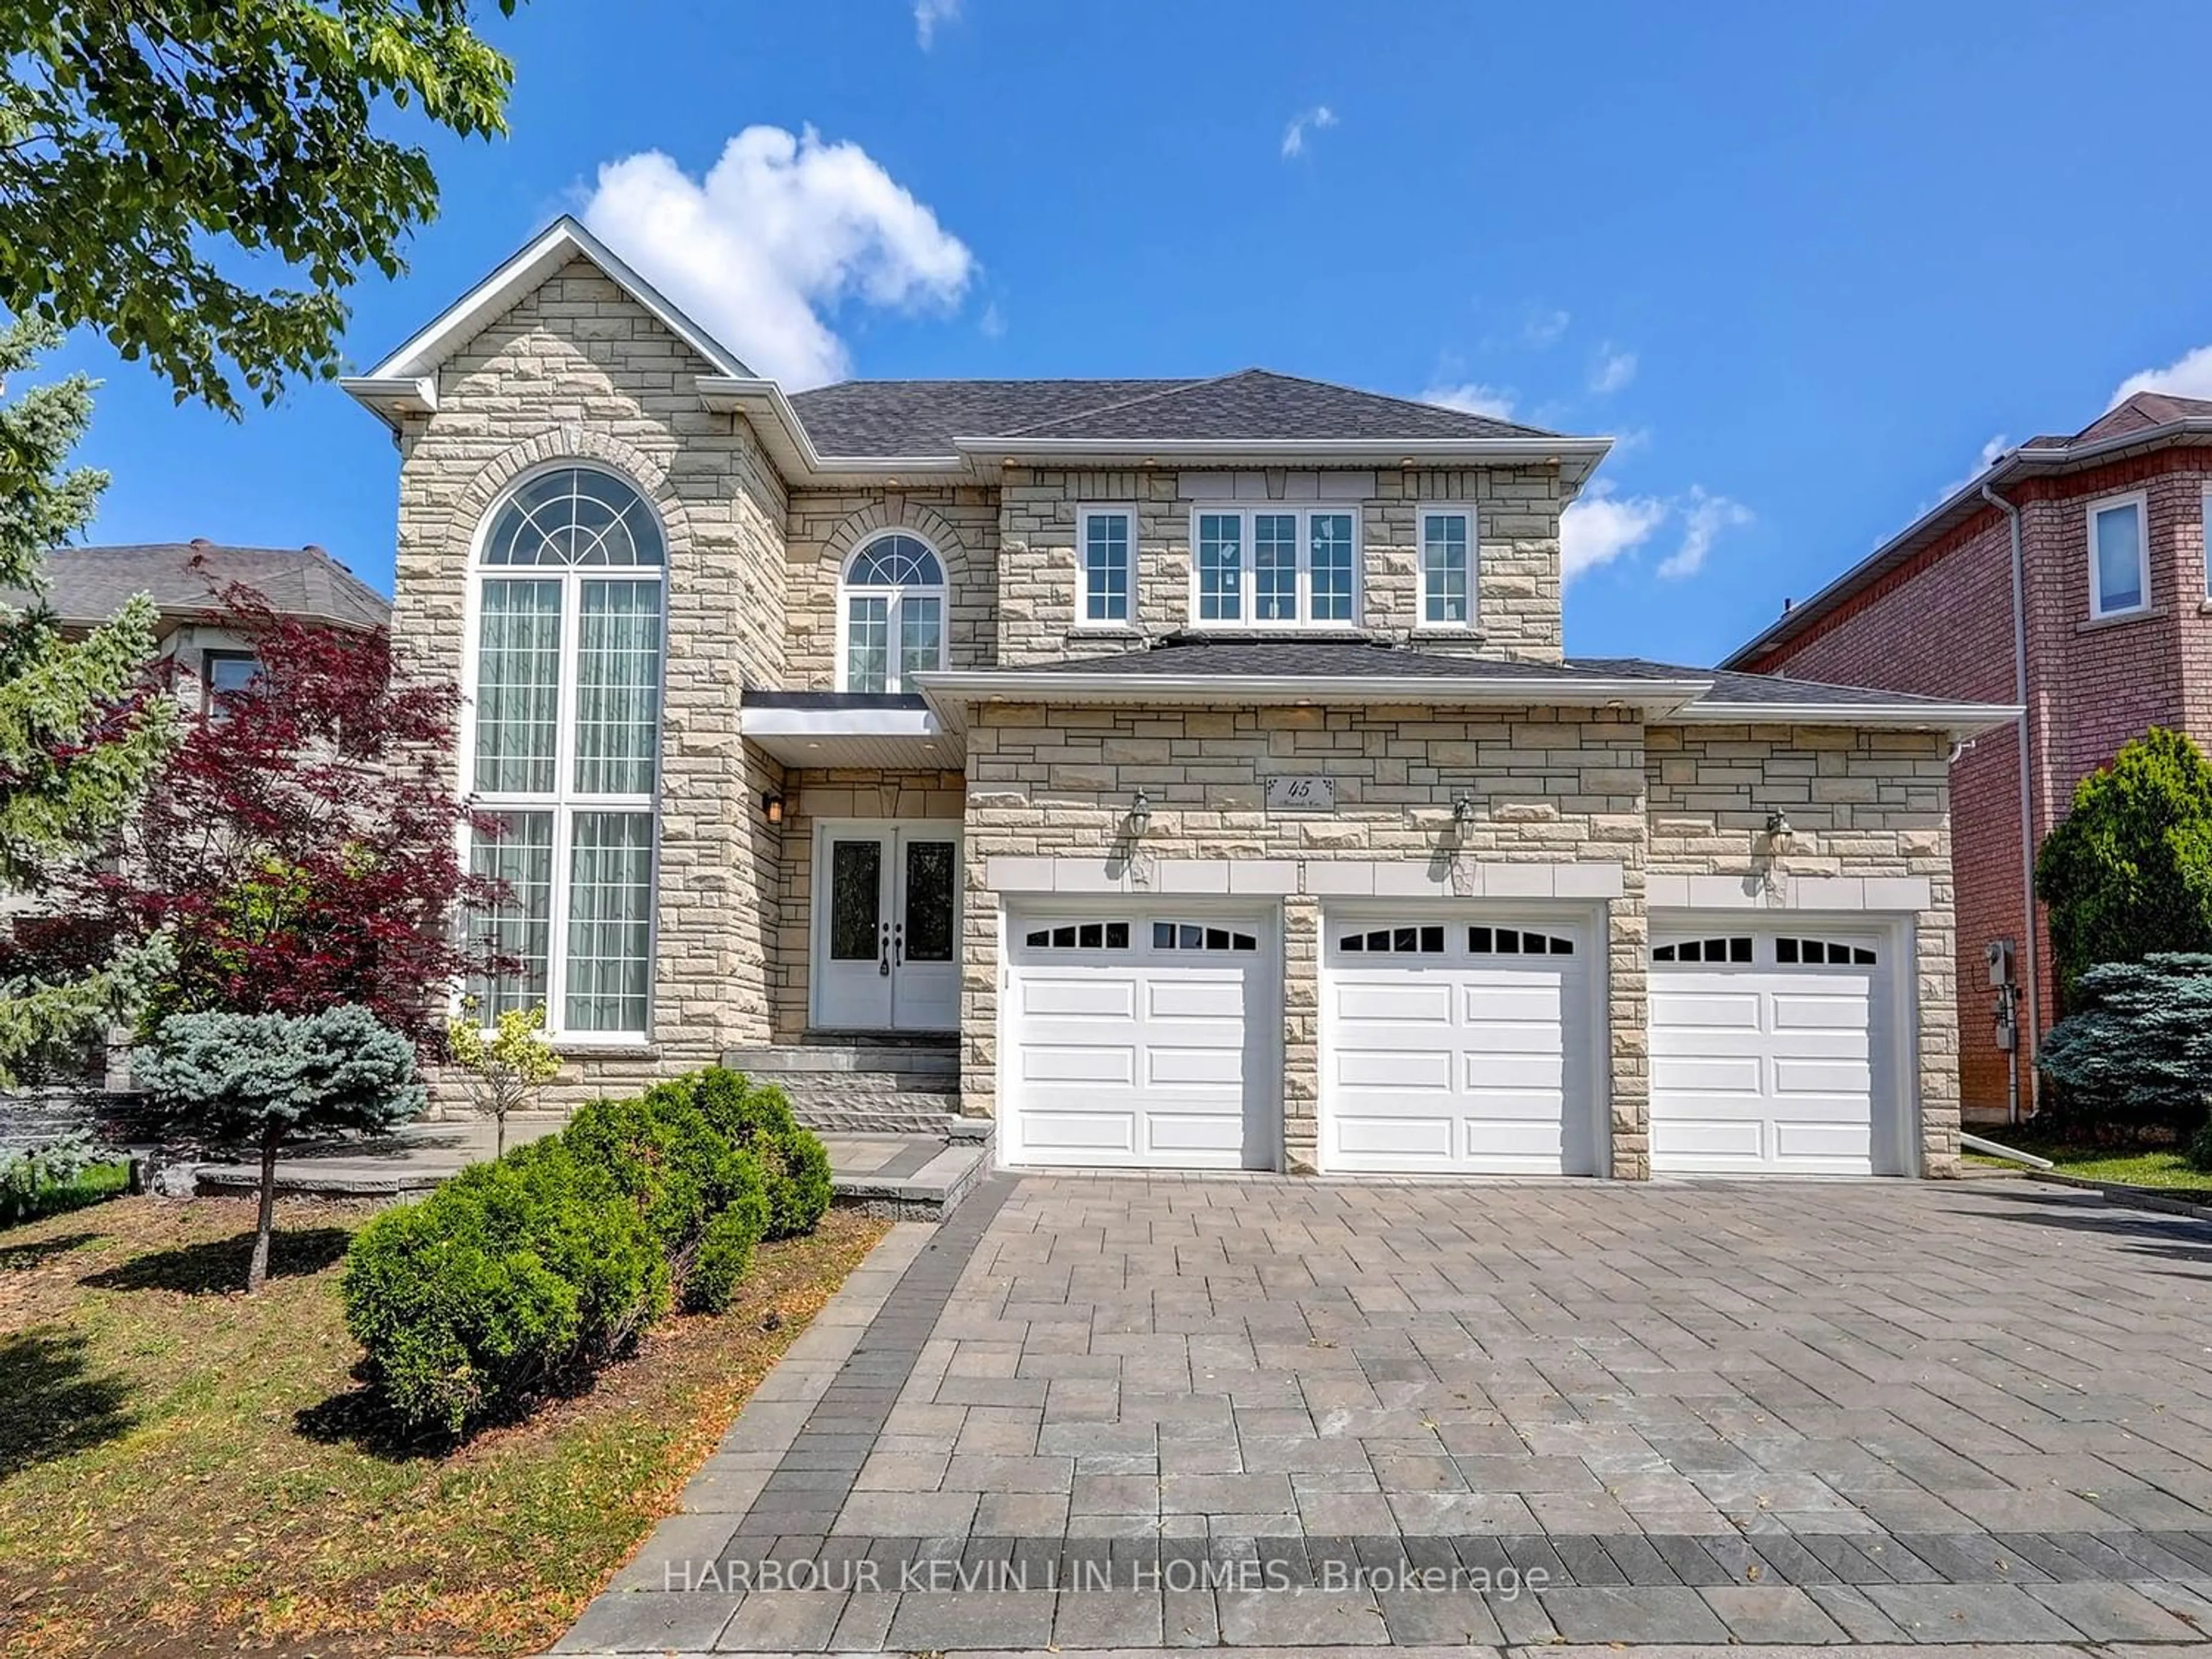 Home with brick exterior material for 45 Henricks Cres, Richmond Hill Ontario L4B 3W4